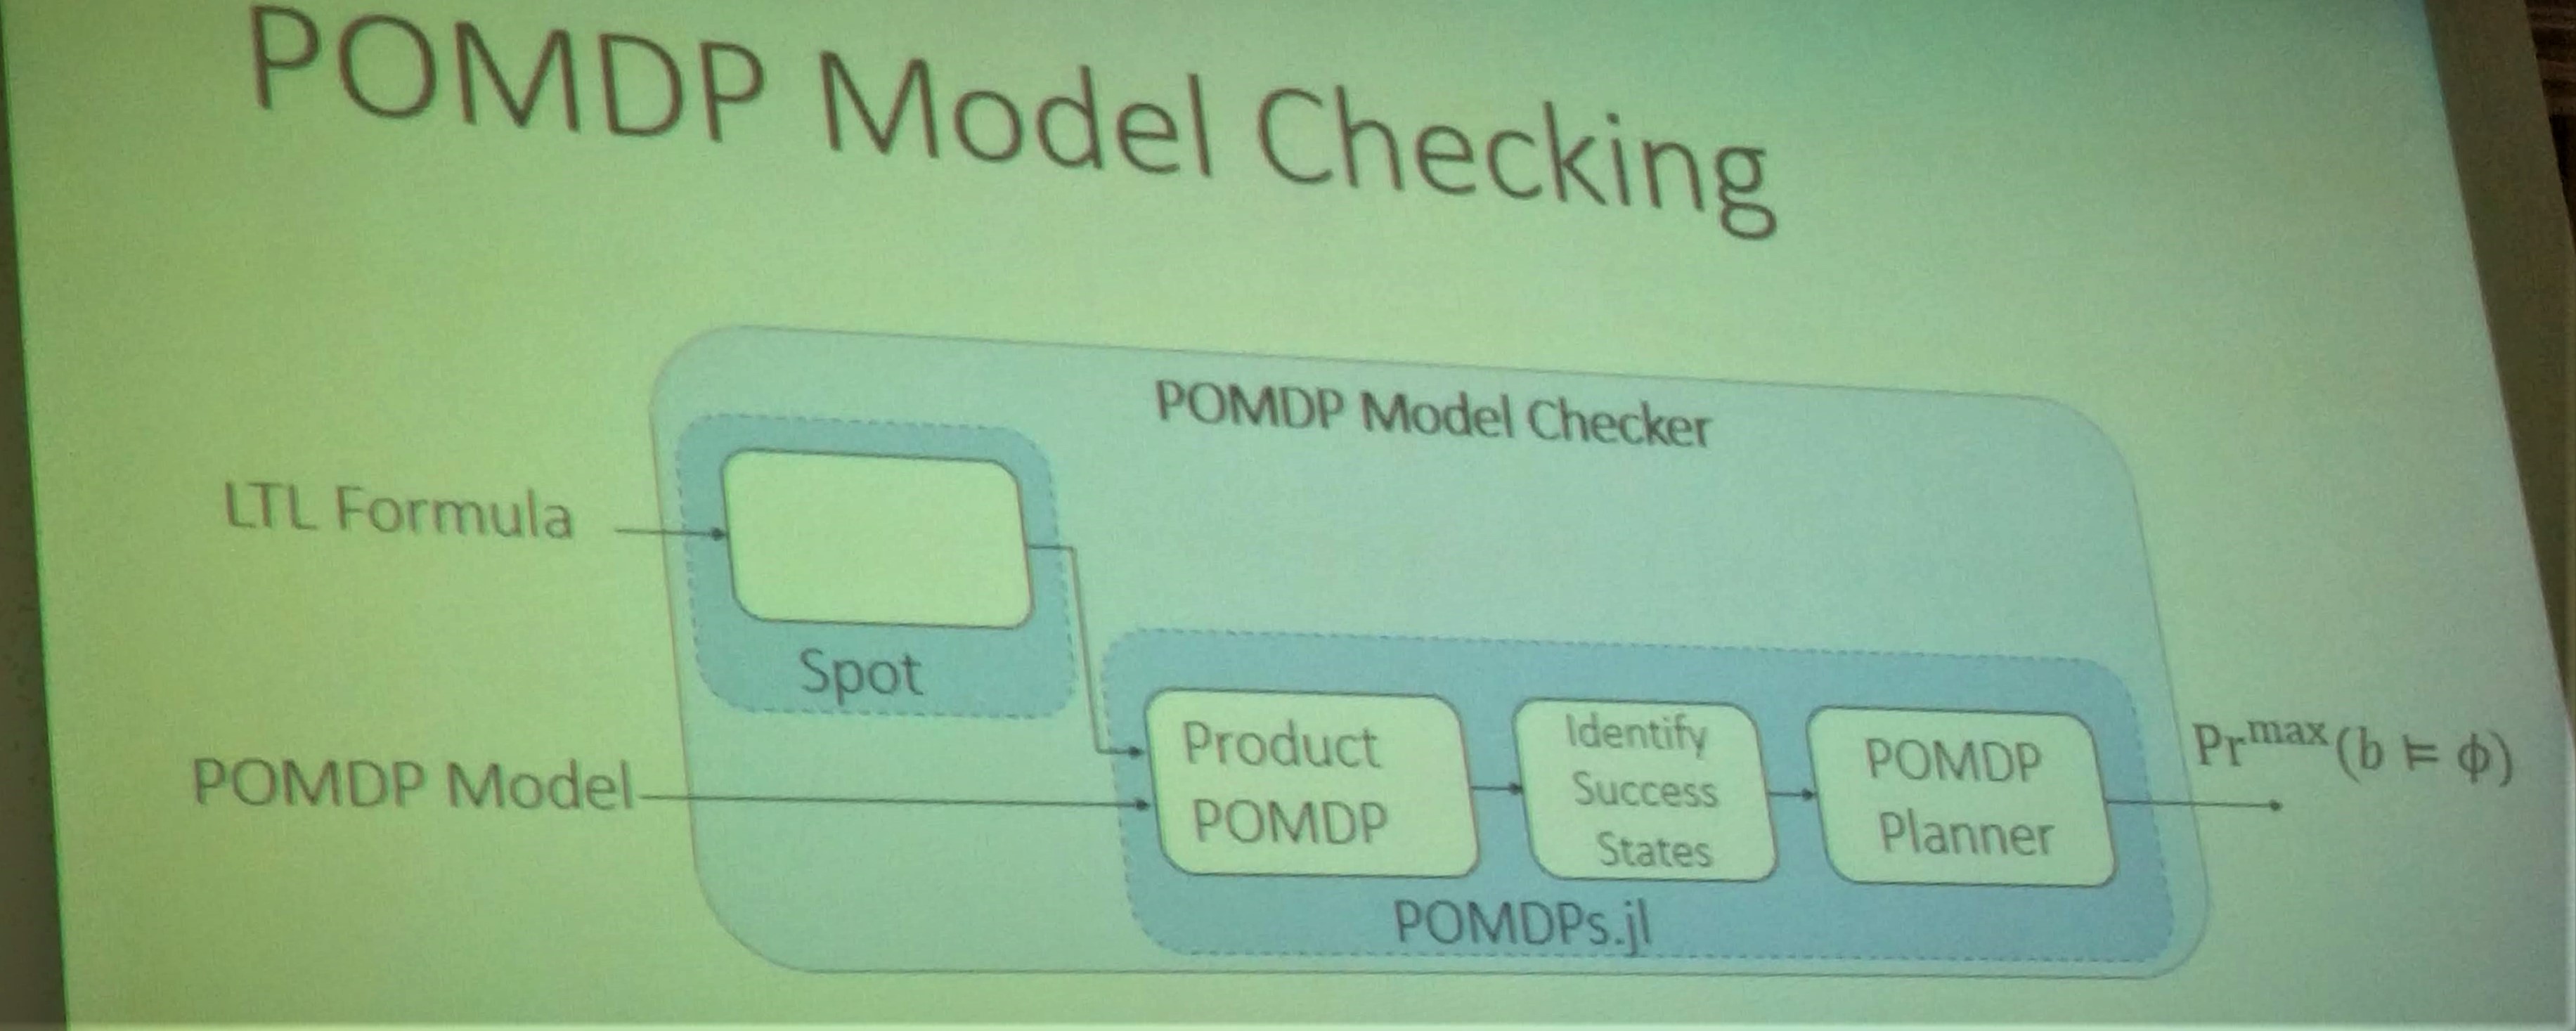 POMDP Model Checker. Source: author provided - taken during the SIPD workshop.